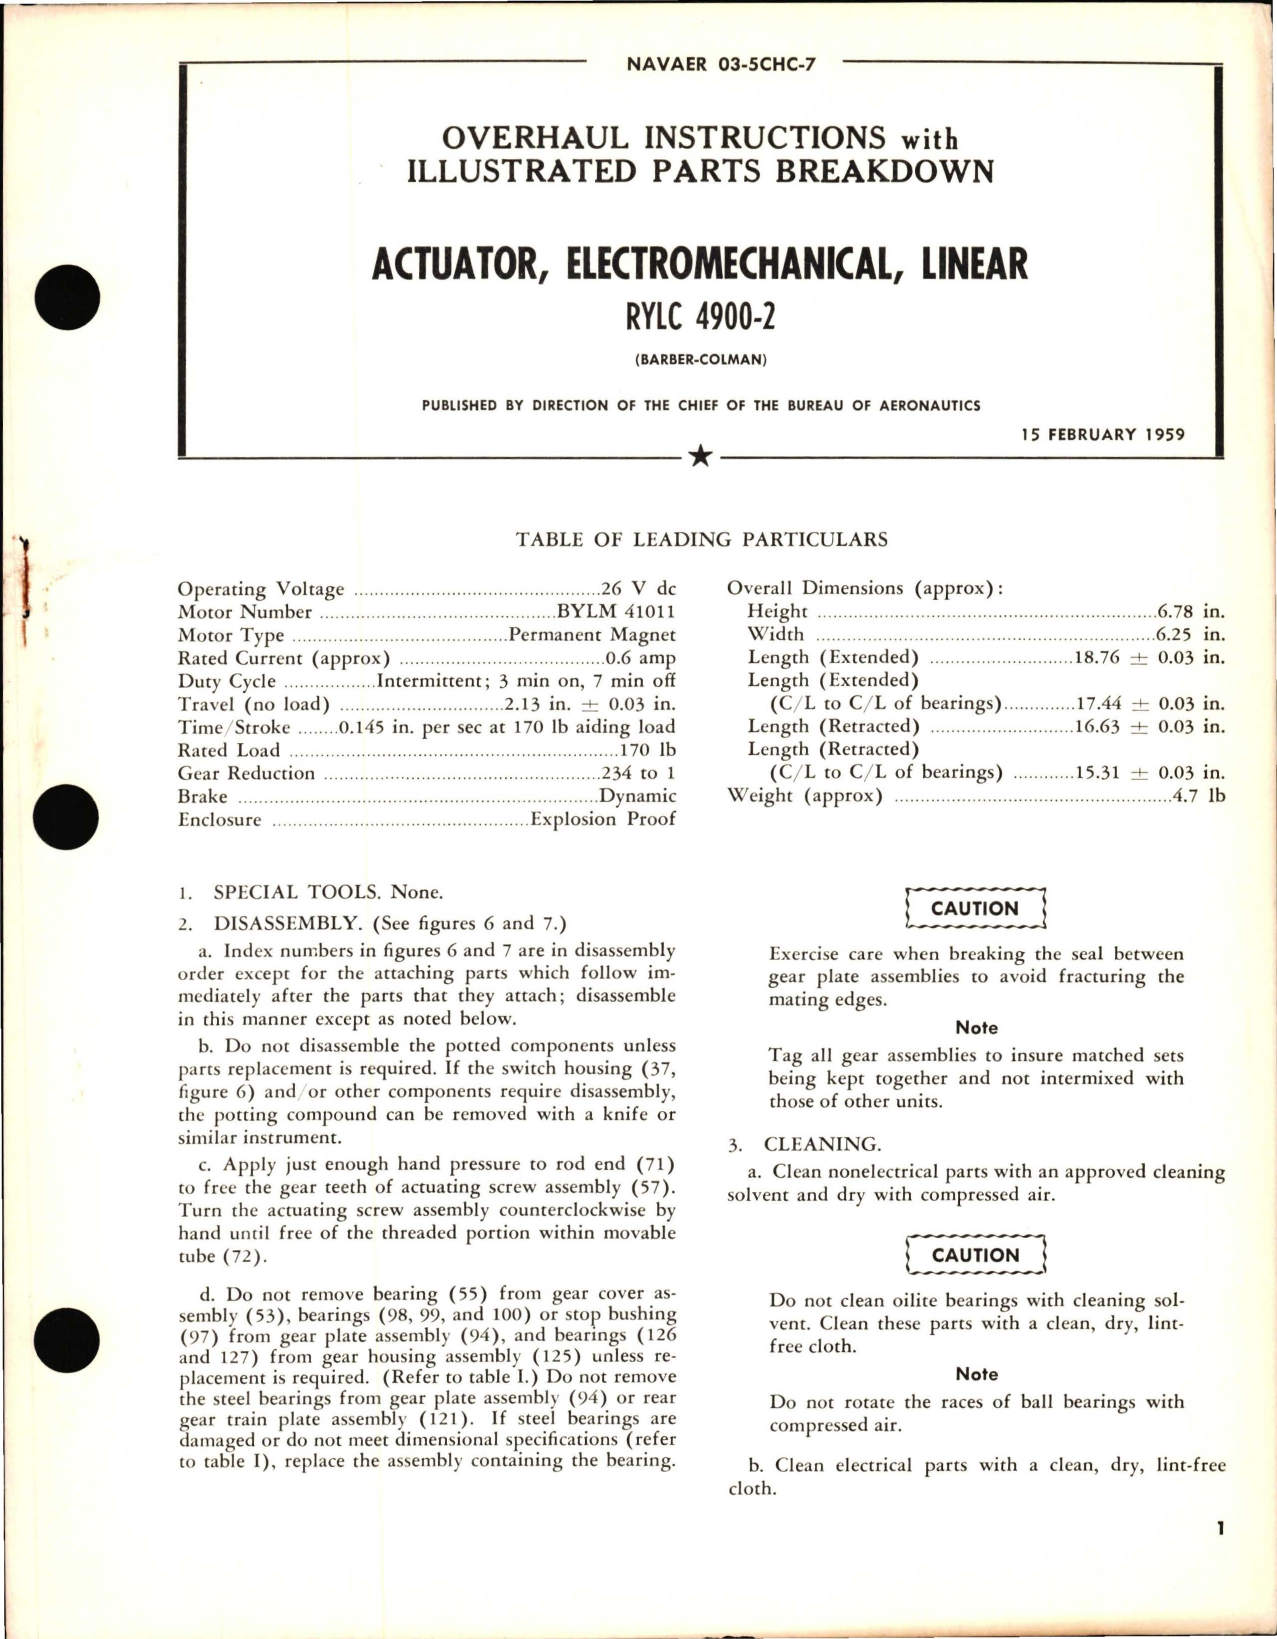 Sample page 1 from AirCorps Library document: Overhaul Instructions with Illustrated Parts Breakdown for Electromechanical Linear Actuator - RYLC 4900-2 